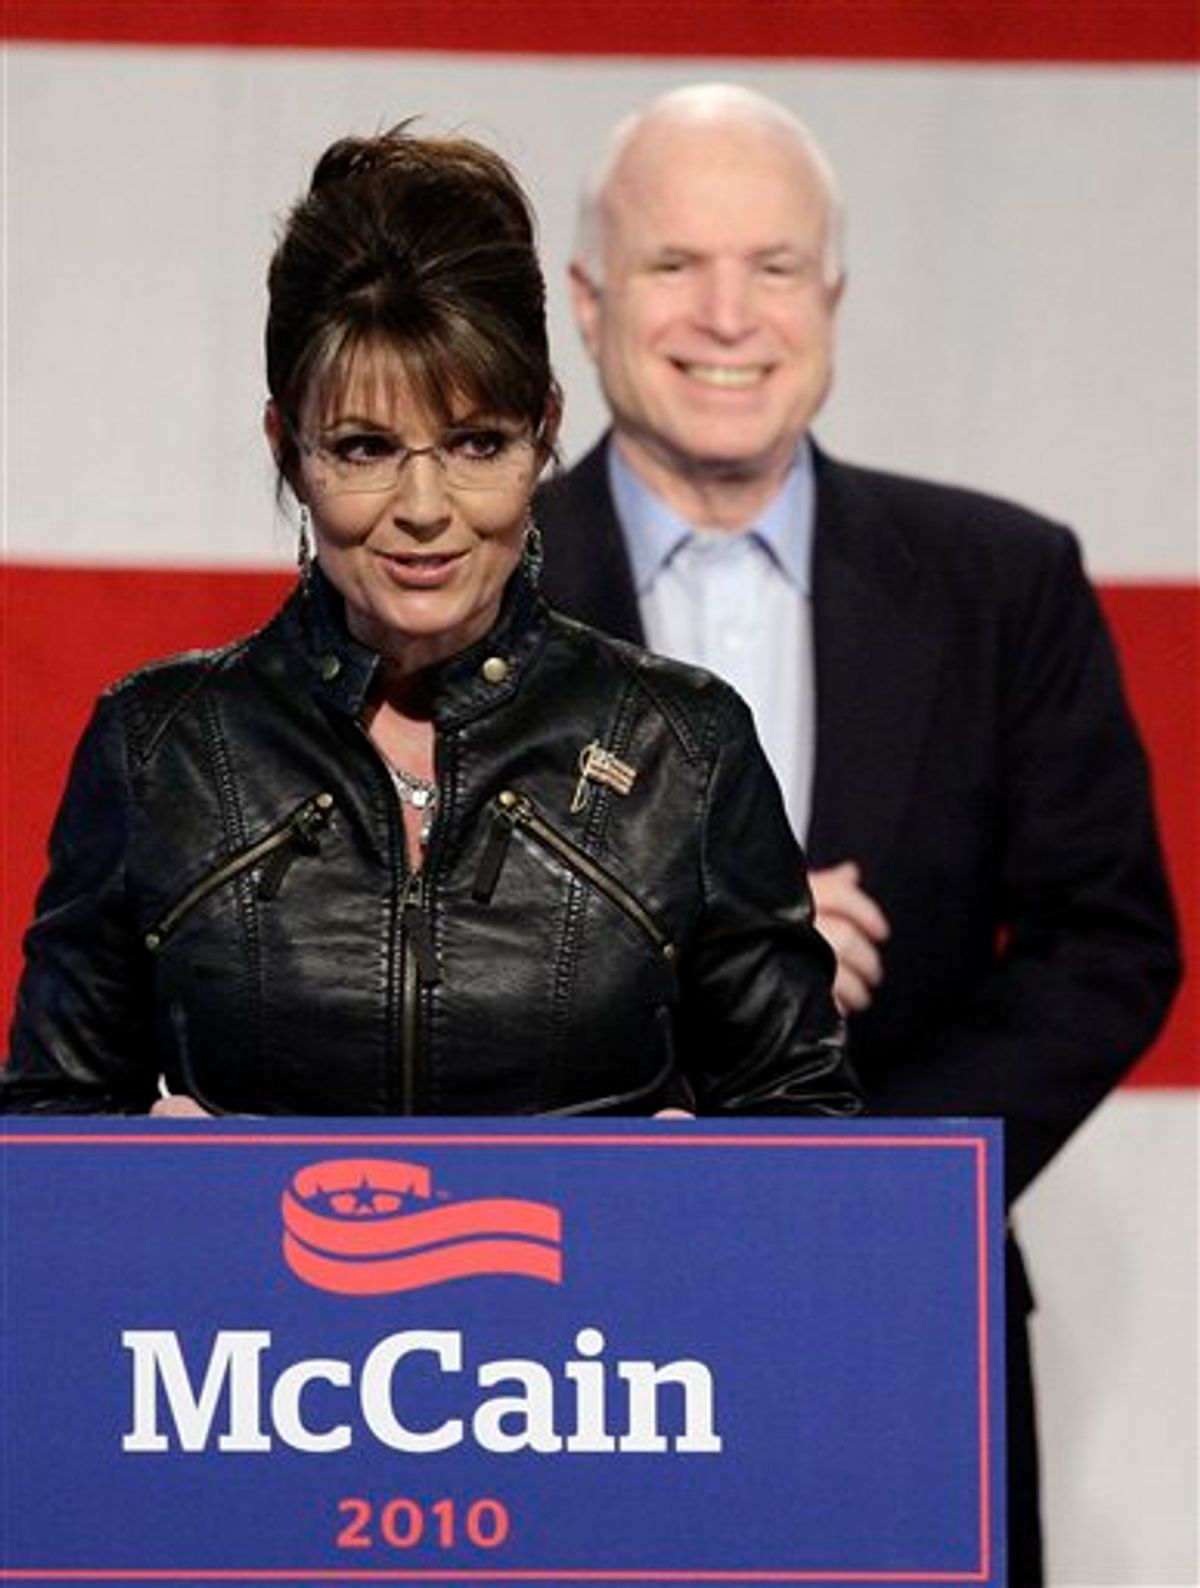 FILE - In this Friday, March 26, 2010  file photo, Sarah Palin, left, talks at a campaign rally for Sen. John McCain, back, at the Pima County Fairgrounds in Tucson, Ariz. Sarah Palin and thousands of tea party activists plan to descend on Sen. Harry Reid's hometown in the Nevada desert Saturday to call for the ouster of Democrats who supported the health care overhaul. (AP Photo/Ross D. Franklin, File) (AP)